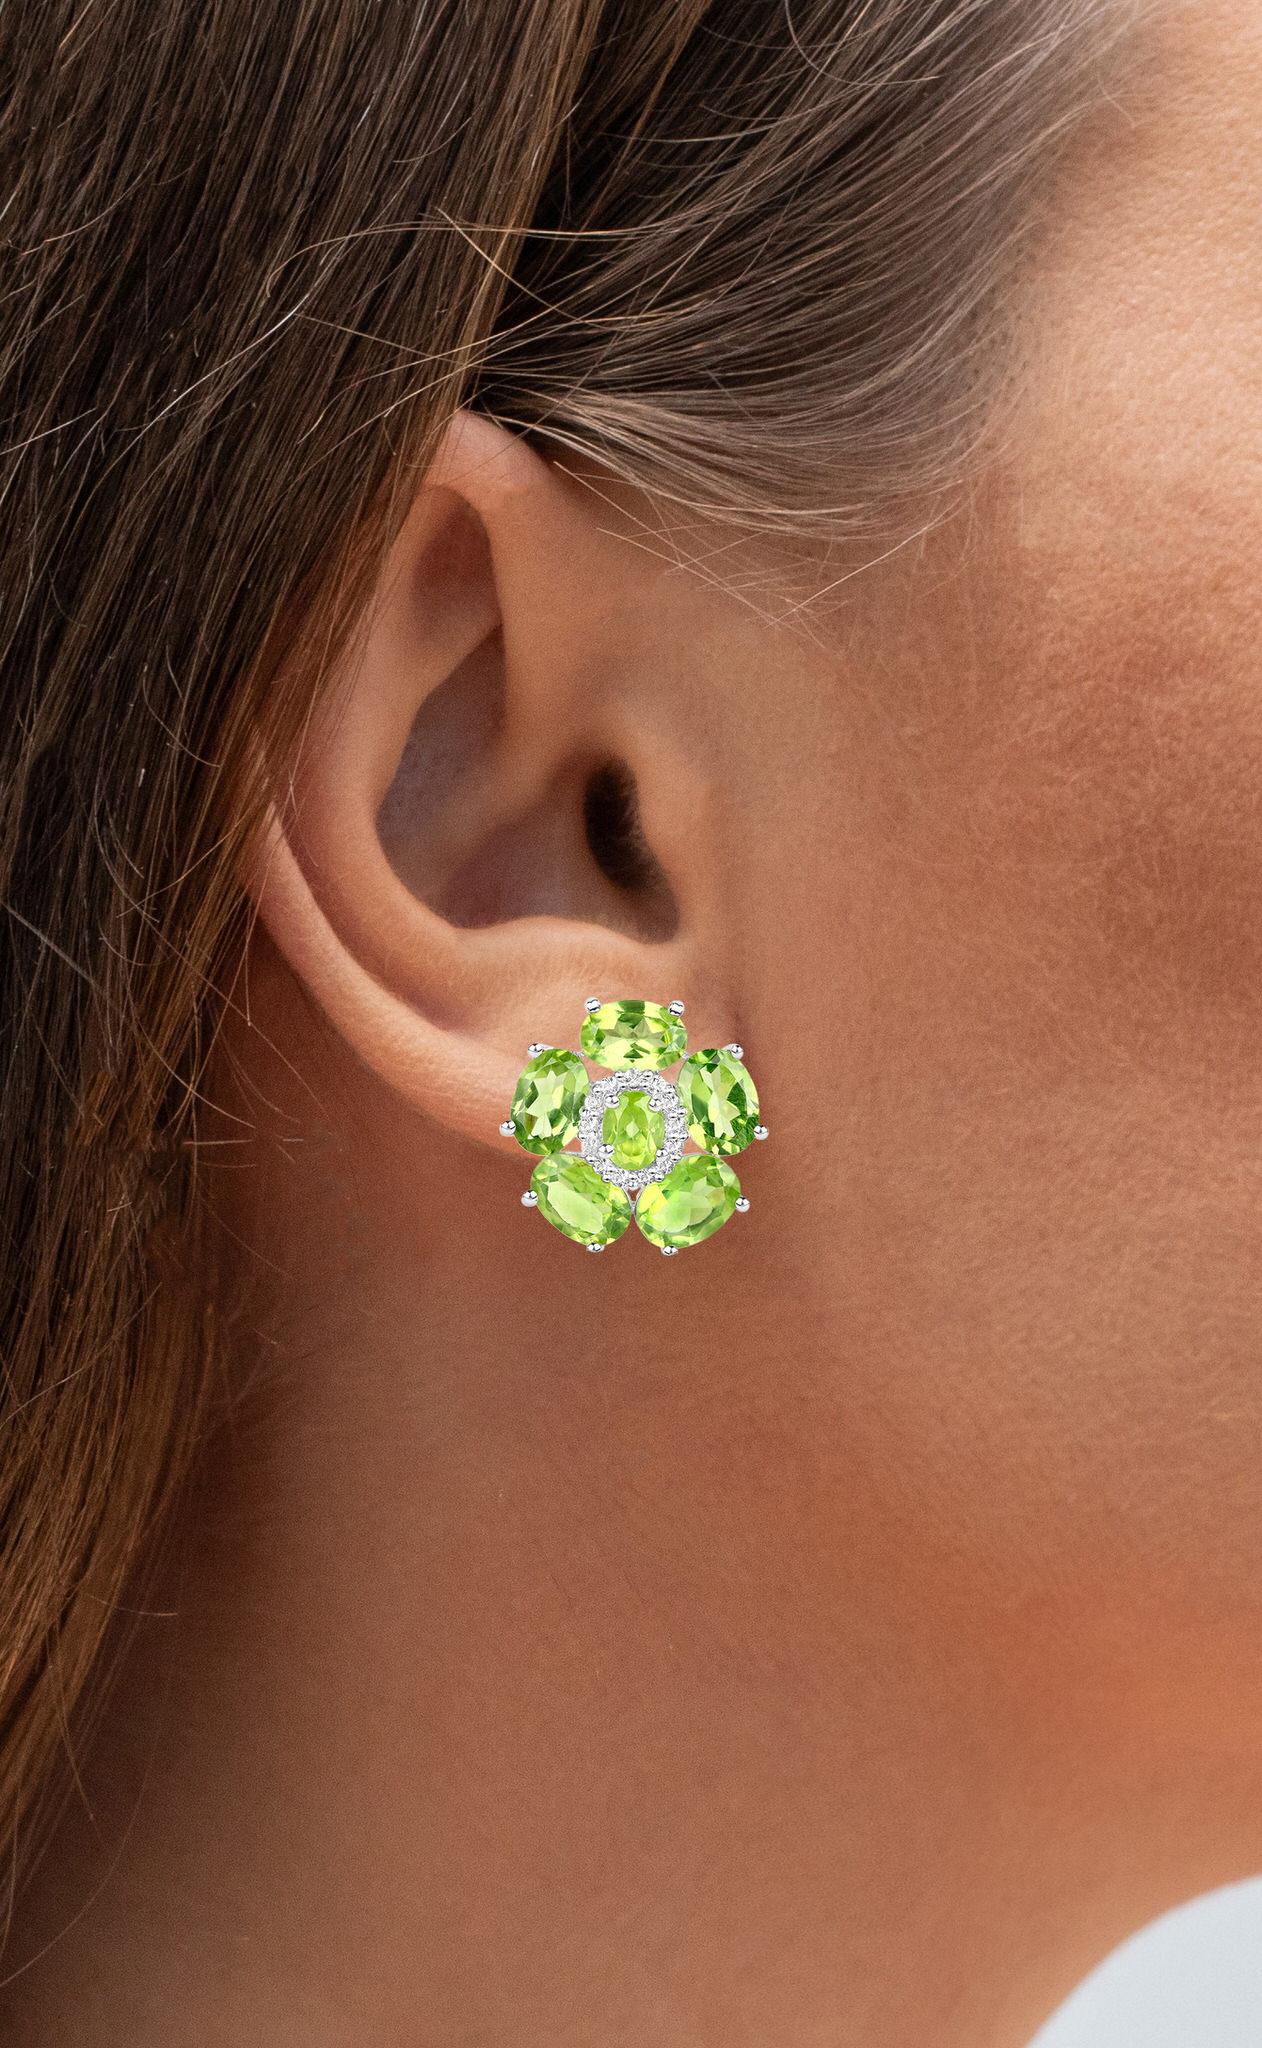 It comes with the Gemological Appraisal by GIA GG/AJP
All Gemstones are Natural
12 Peridots = 9.00 Carats
26 White Topazes = 0.30 Carats
Metal: 18K White Gold Plated Sterling Silver
Post With Friction Back
Dimensions: 17.3 mm